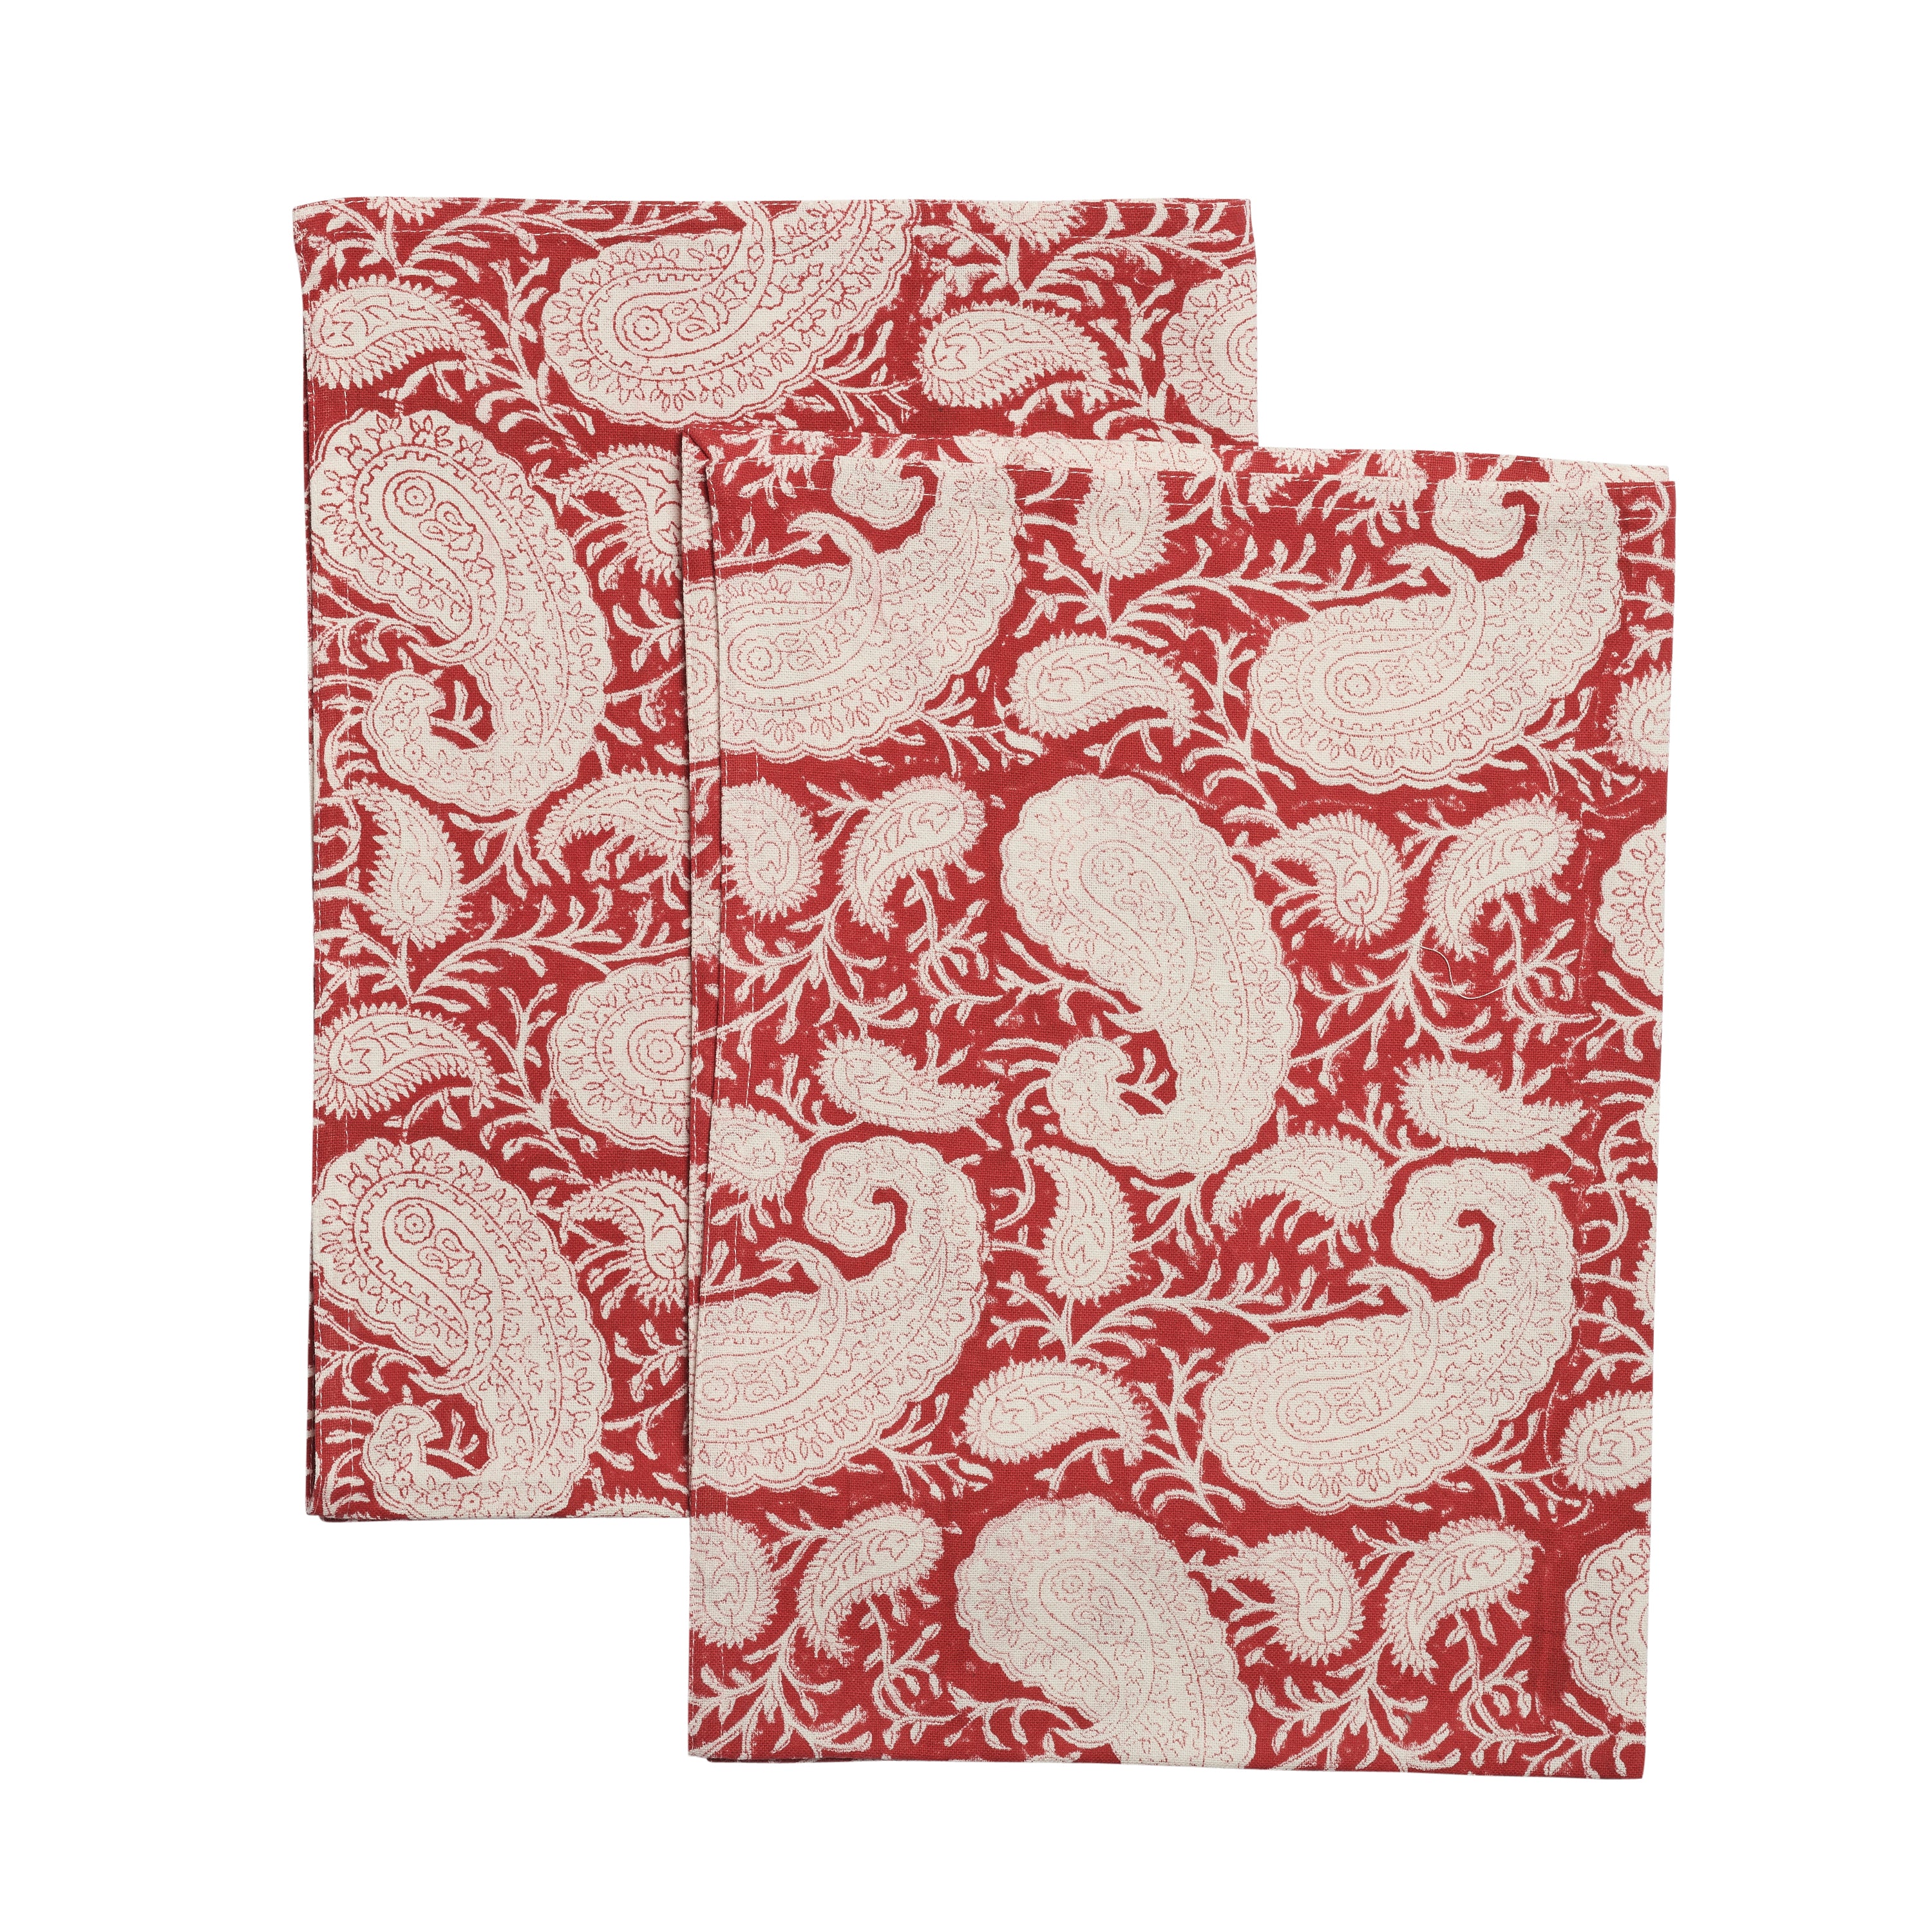 Big Paisley® kitchen towels in Red